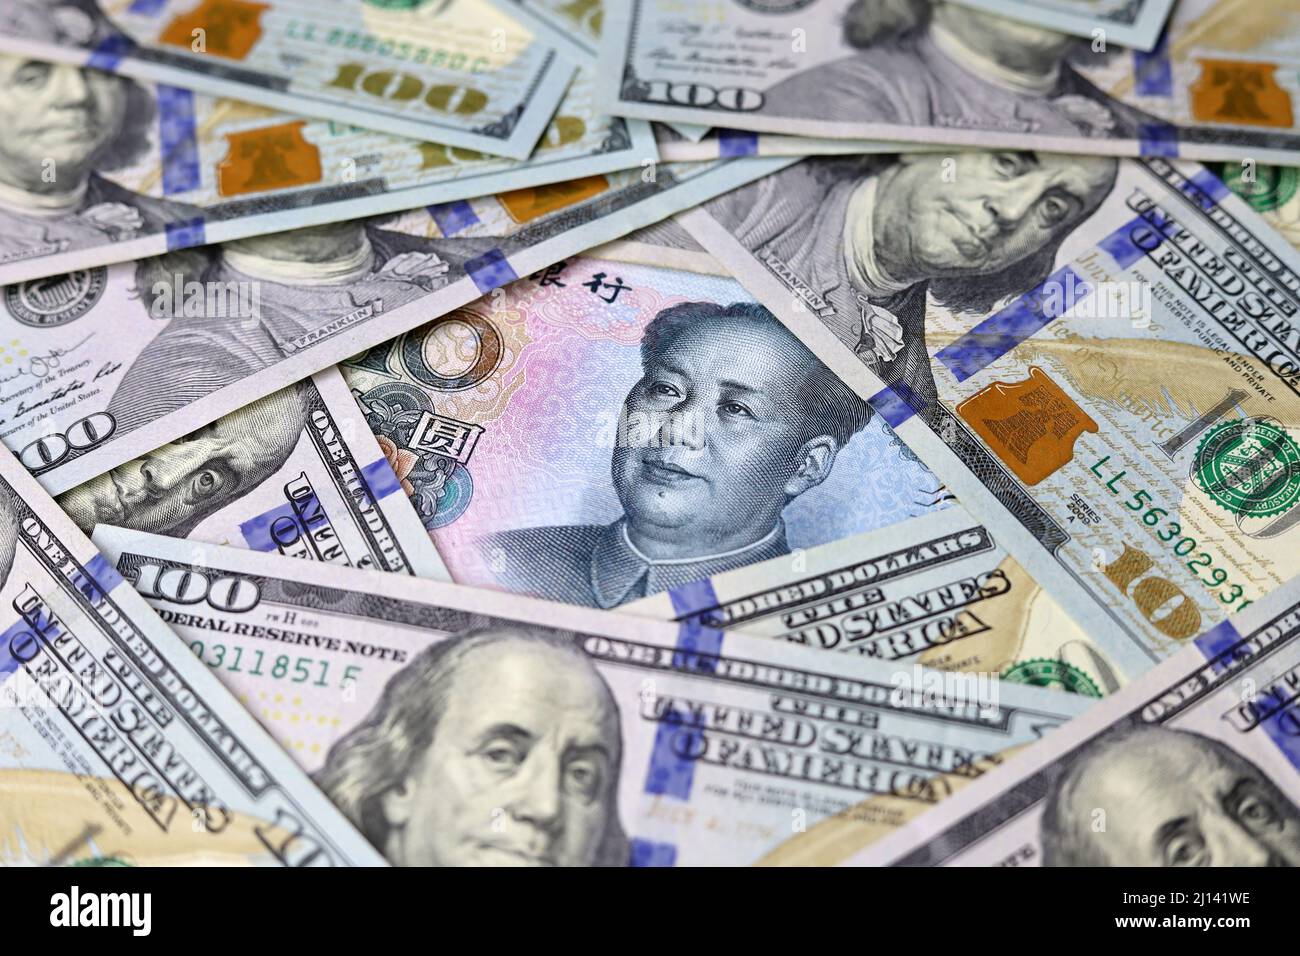 Chinese yuan banknote and US dollars. Concept of trade war between the China and USA, economics, sanctions Stock Photo